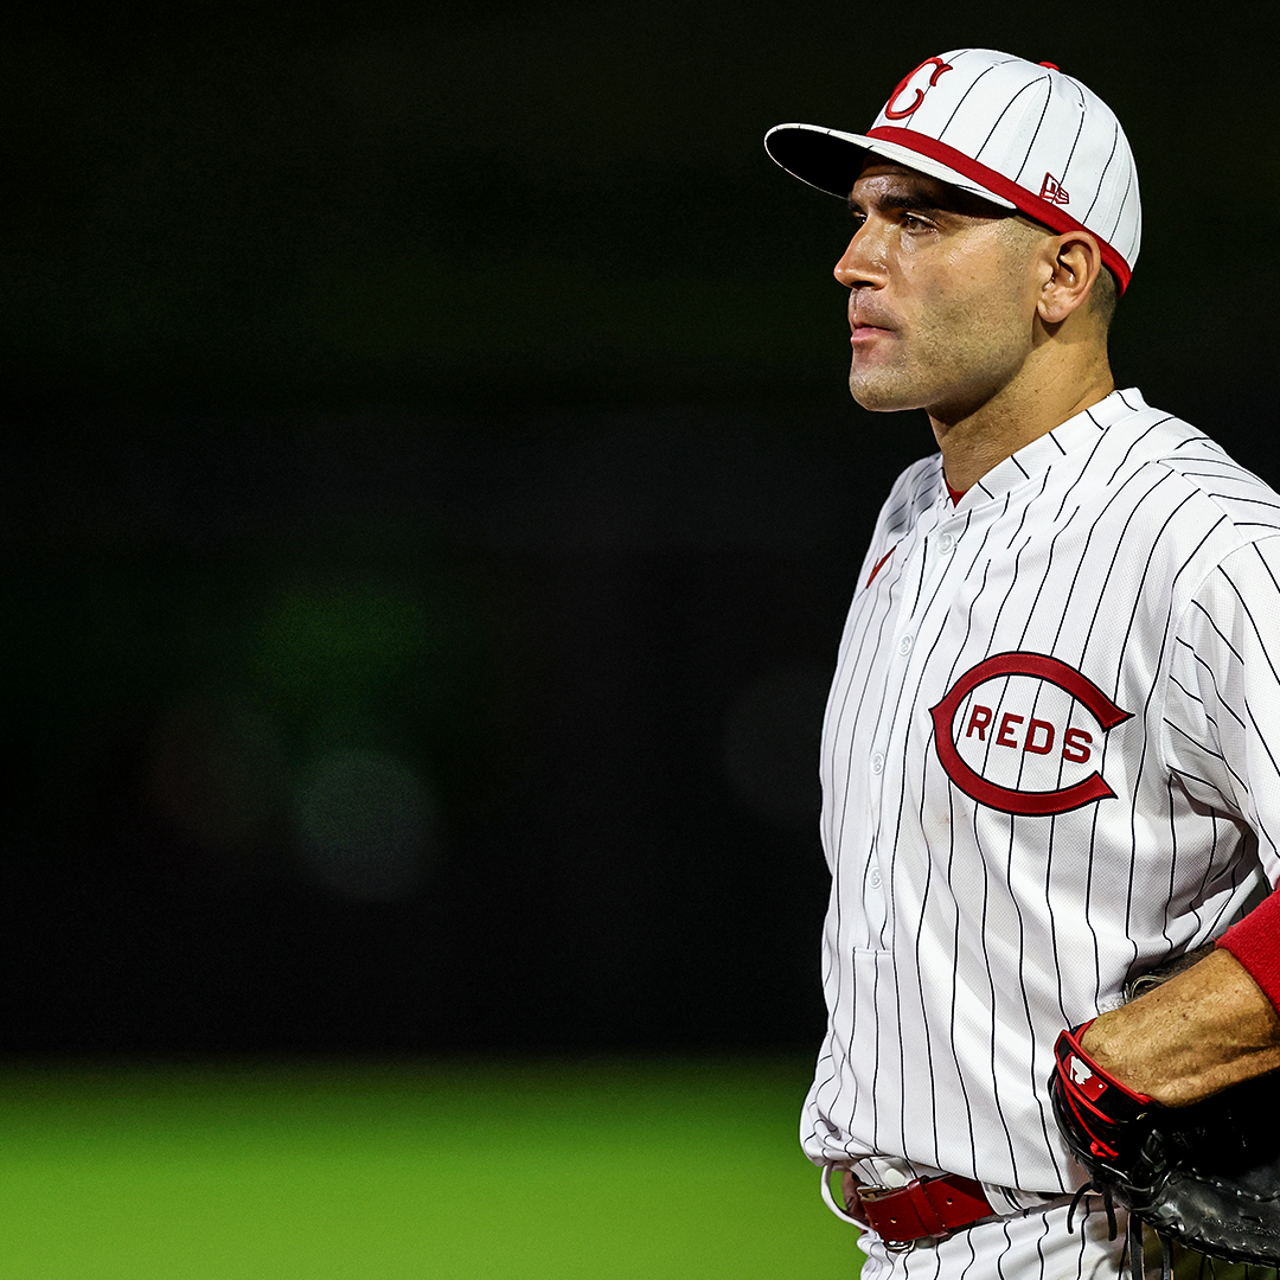 Joey Votto mic'd up during Reds-Braves on ESPN2 was great TV